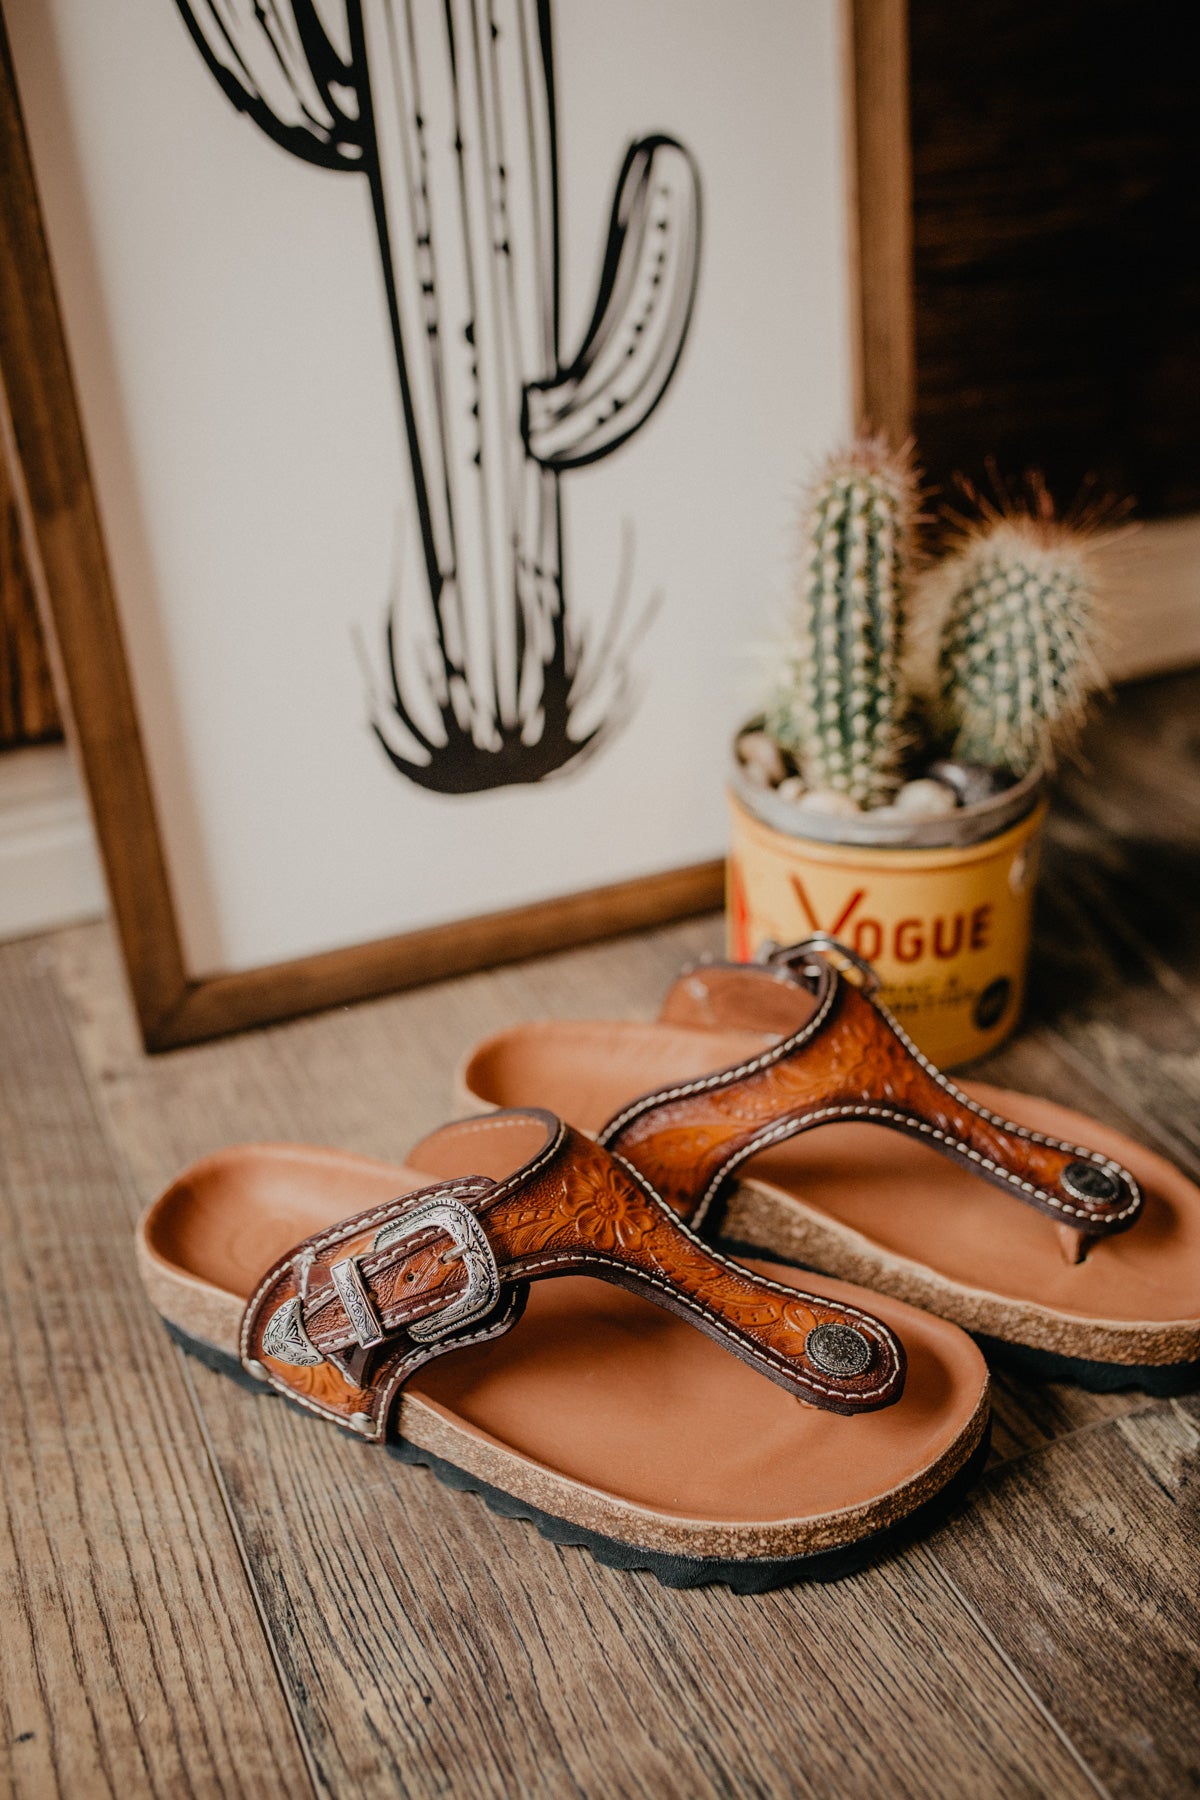 Ella Handtooled Leather Sandal by Stiefeld (Sizes 6-10)